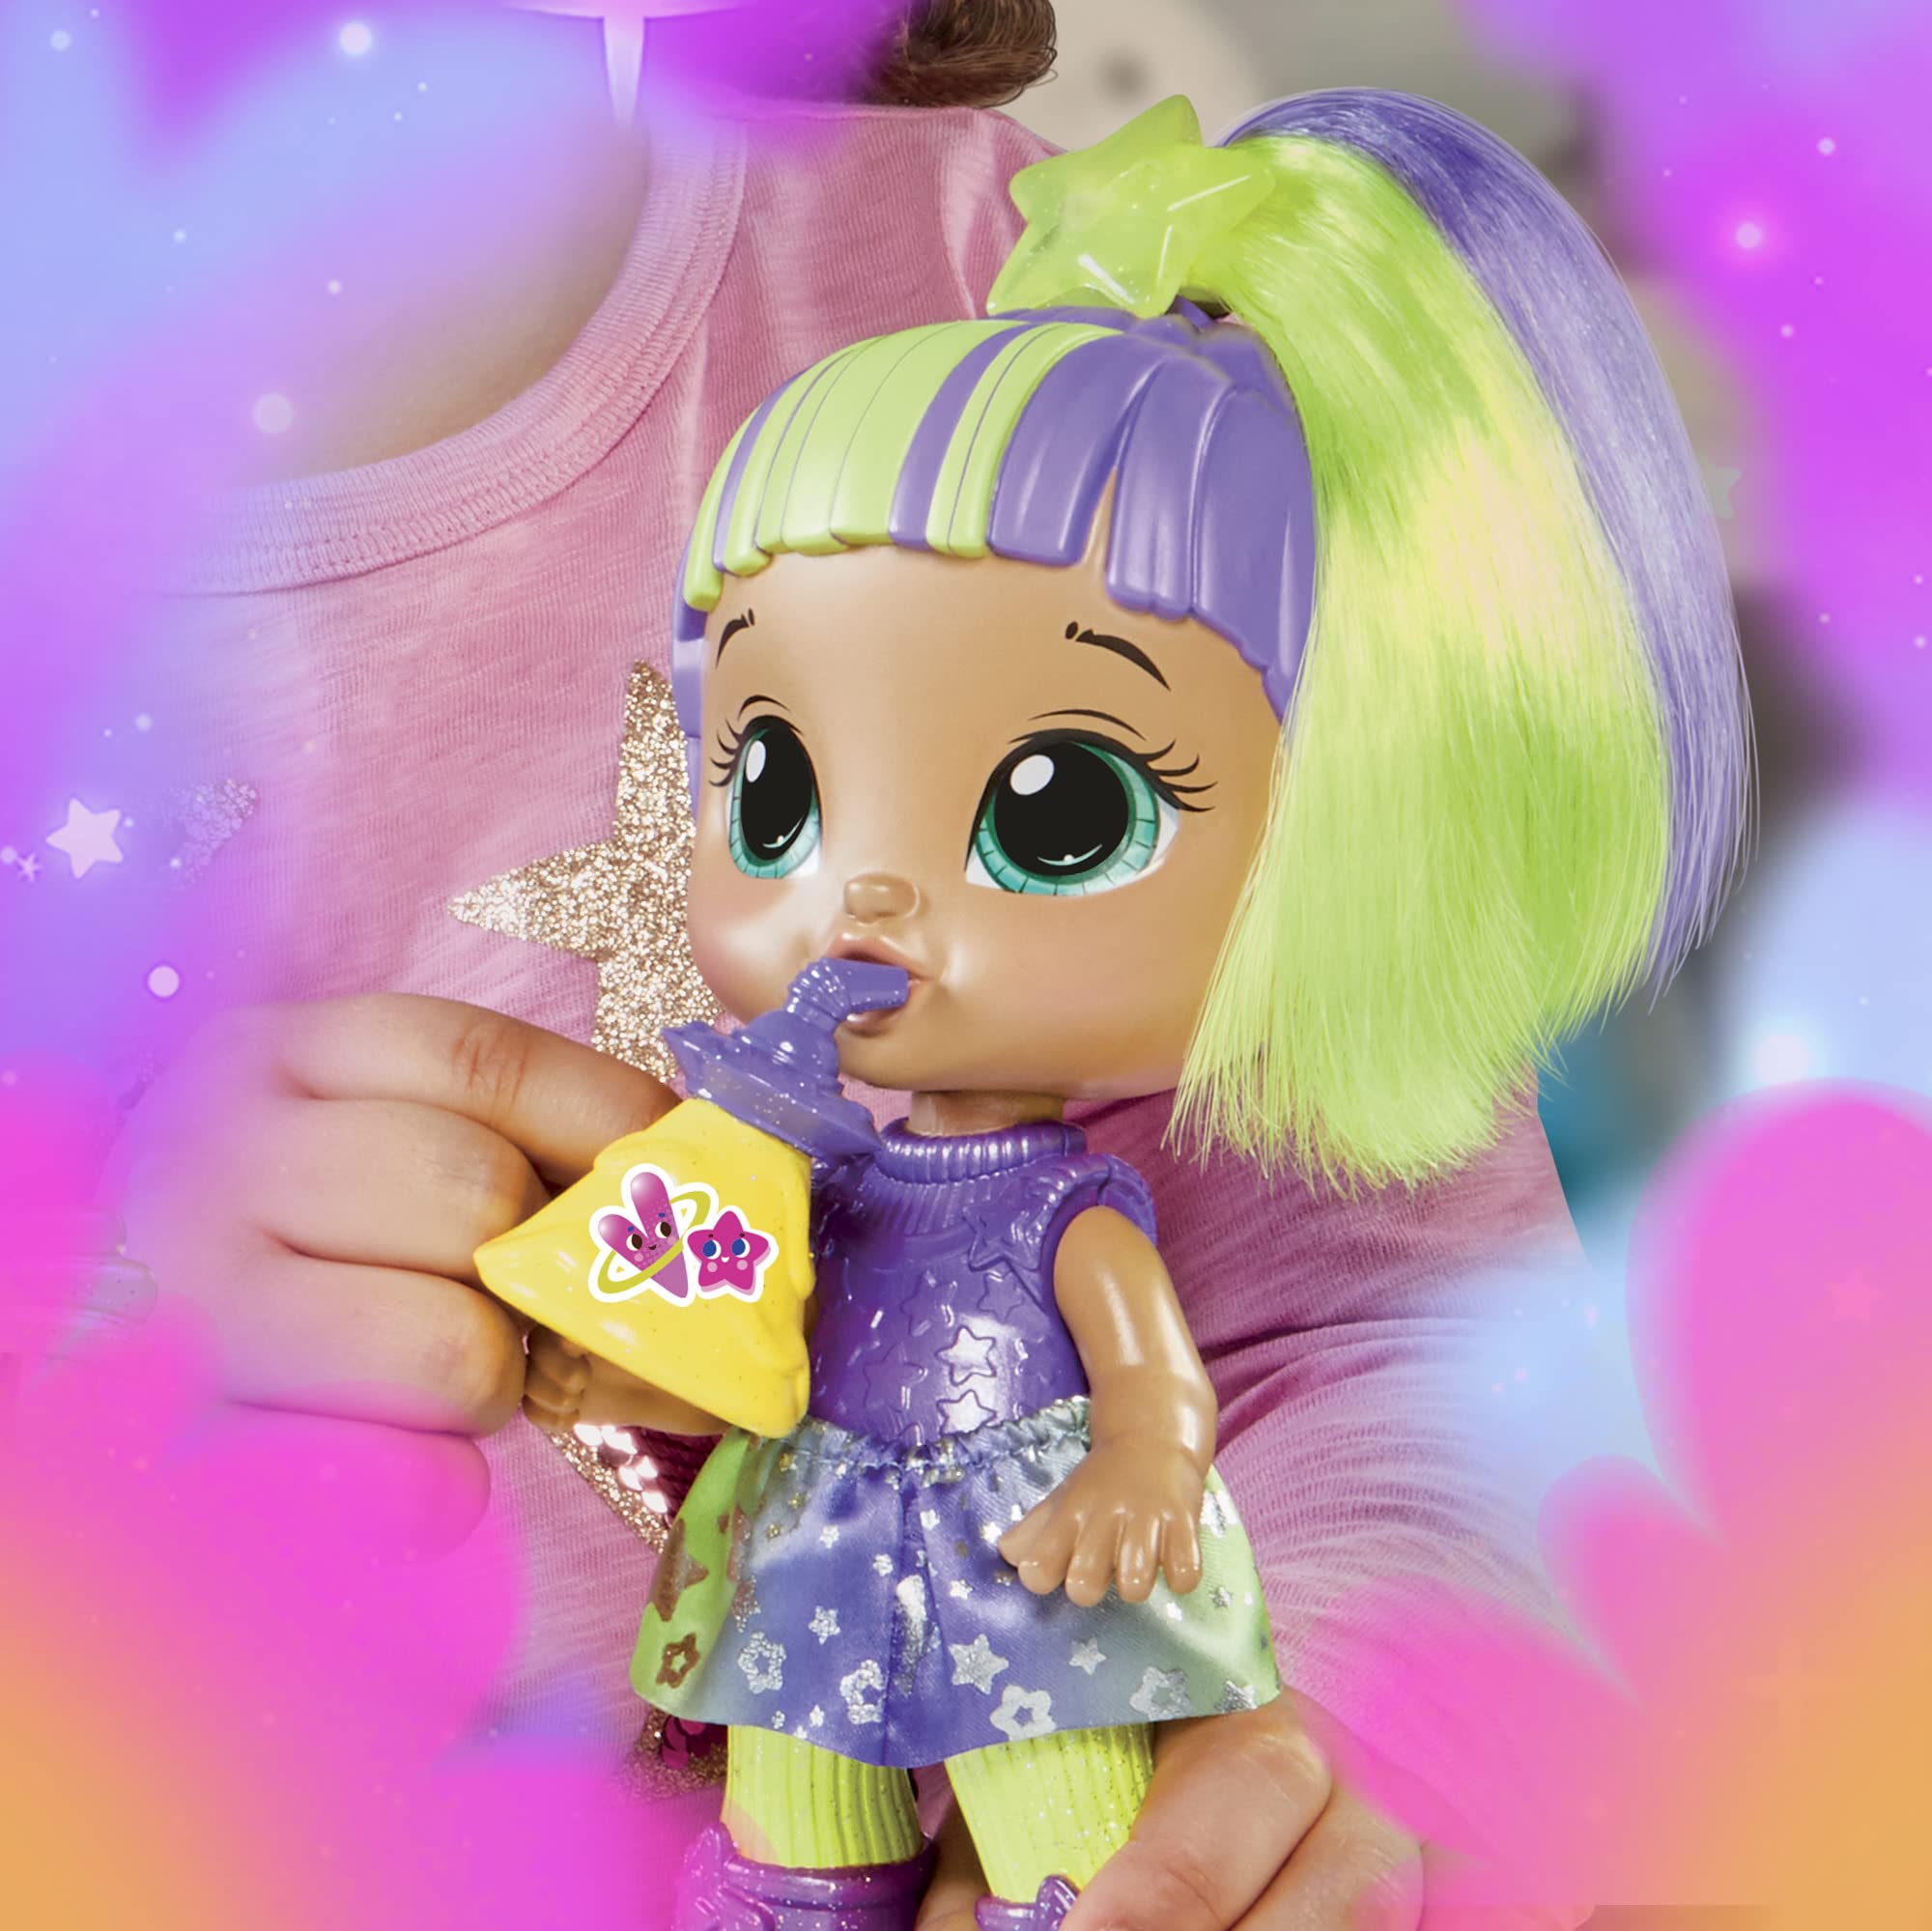 Baby Alive Star Besties Doll, Lovely Luna, 8-inch Space-Themed Doll for 3 Year Old Girls and Boys and Up, Accessories